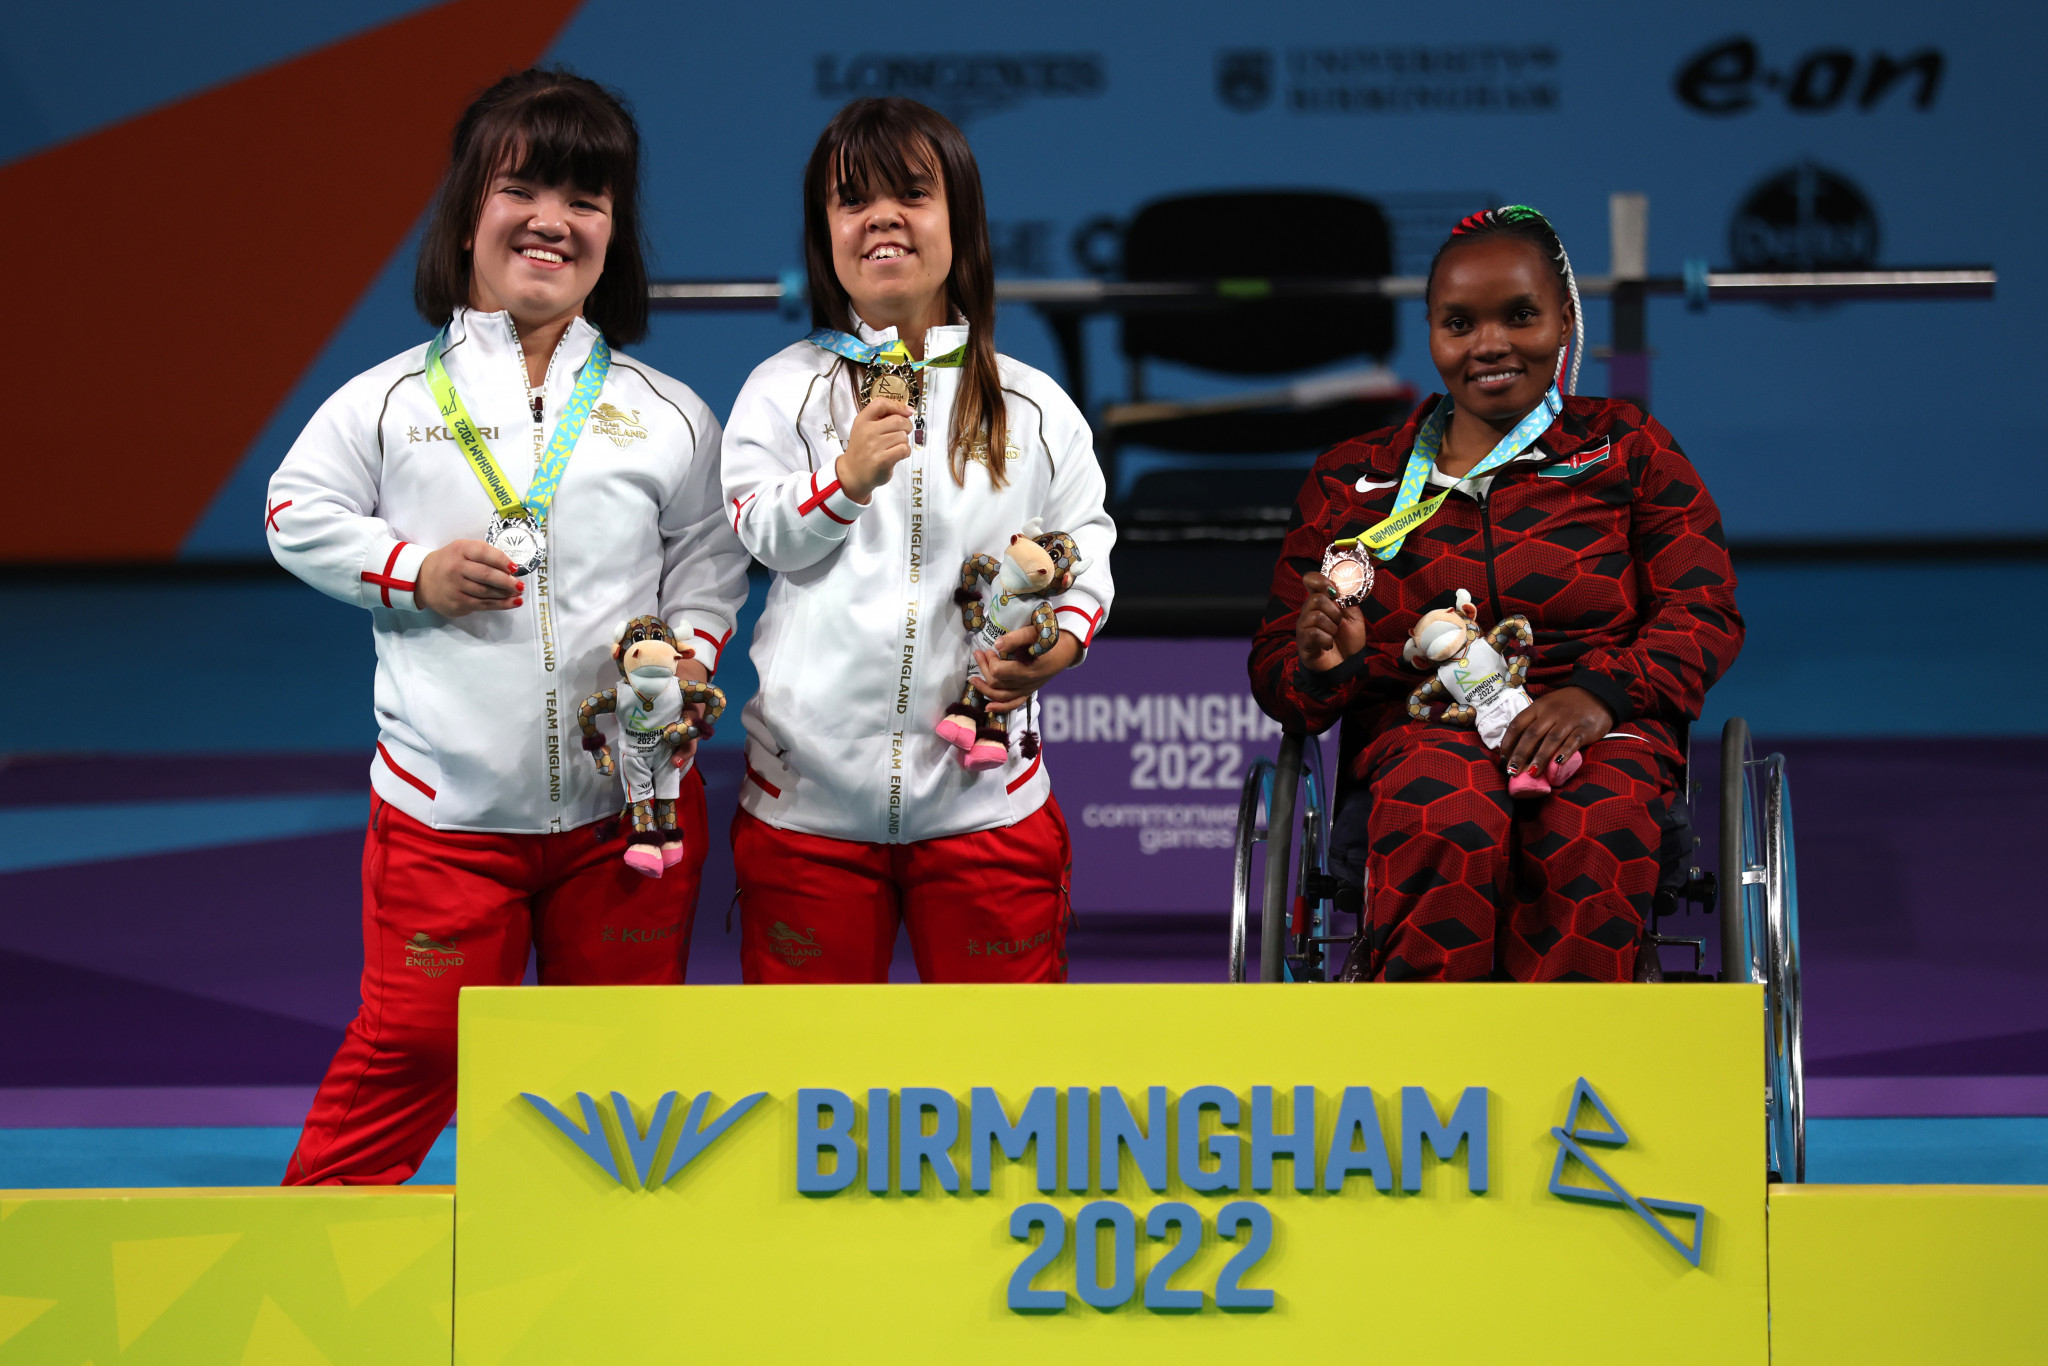 The victory of England's Zoe Newson, centre, in the women's lightweight event marked the first time at the Commonwealth Games that Nigeria did not finish on top of the podium in Para powerlifting ©Getty Images